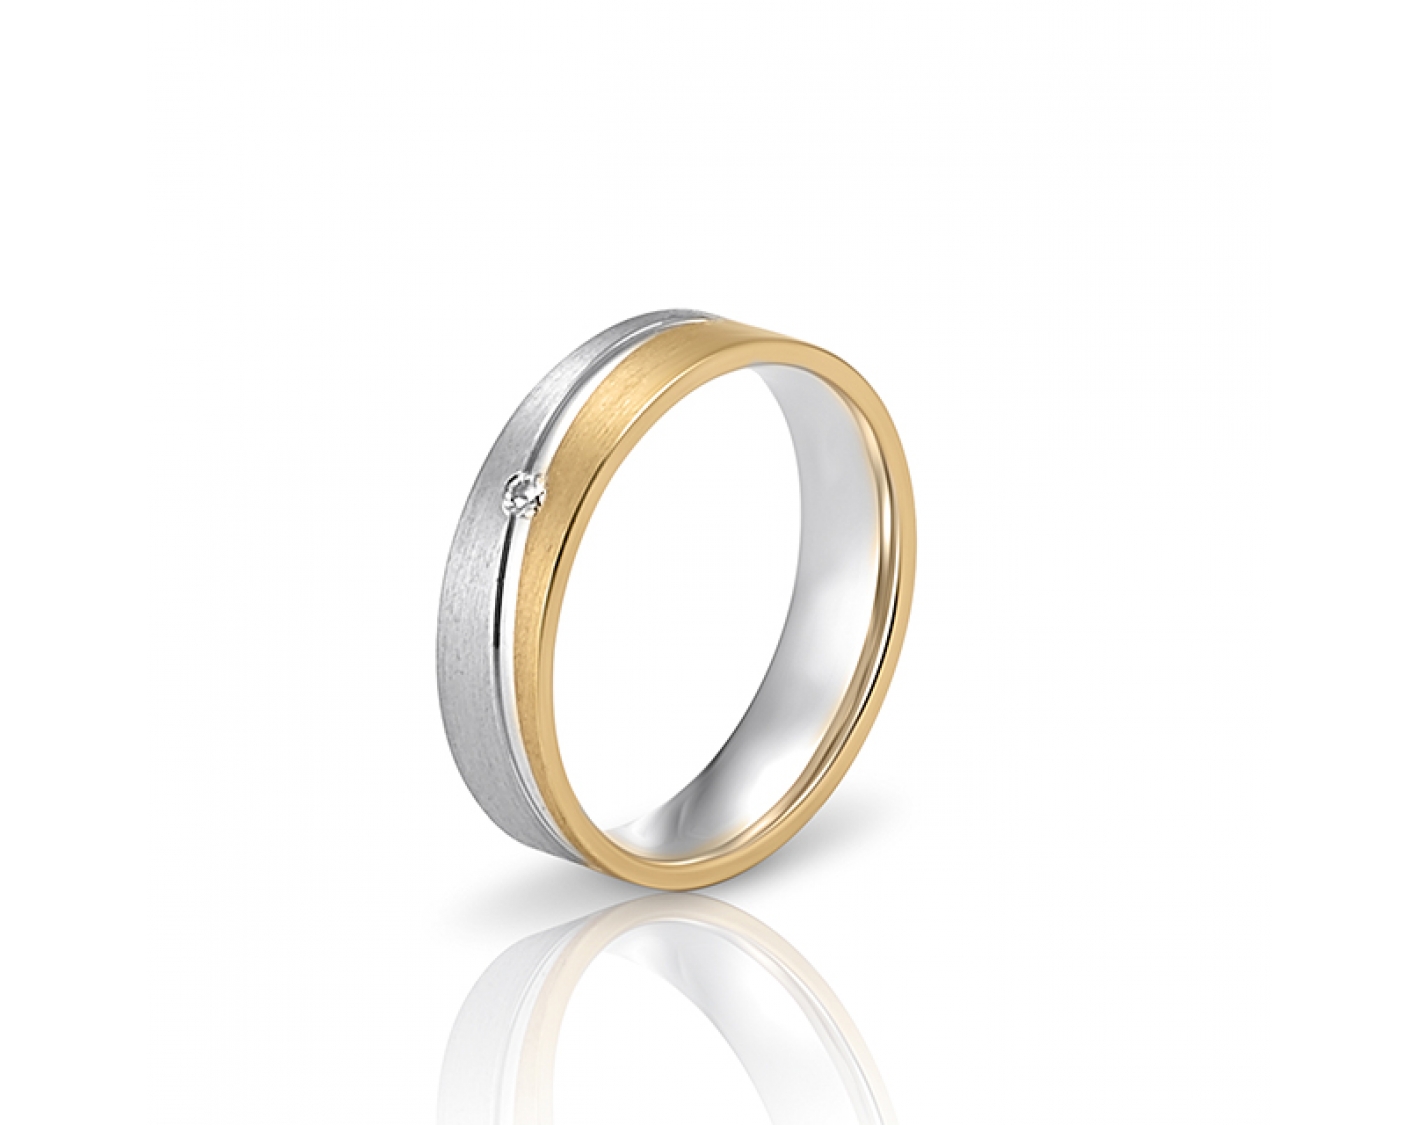 dual-tone 5mm two-toned* wedding band with one diamond and an inlay